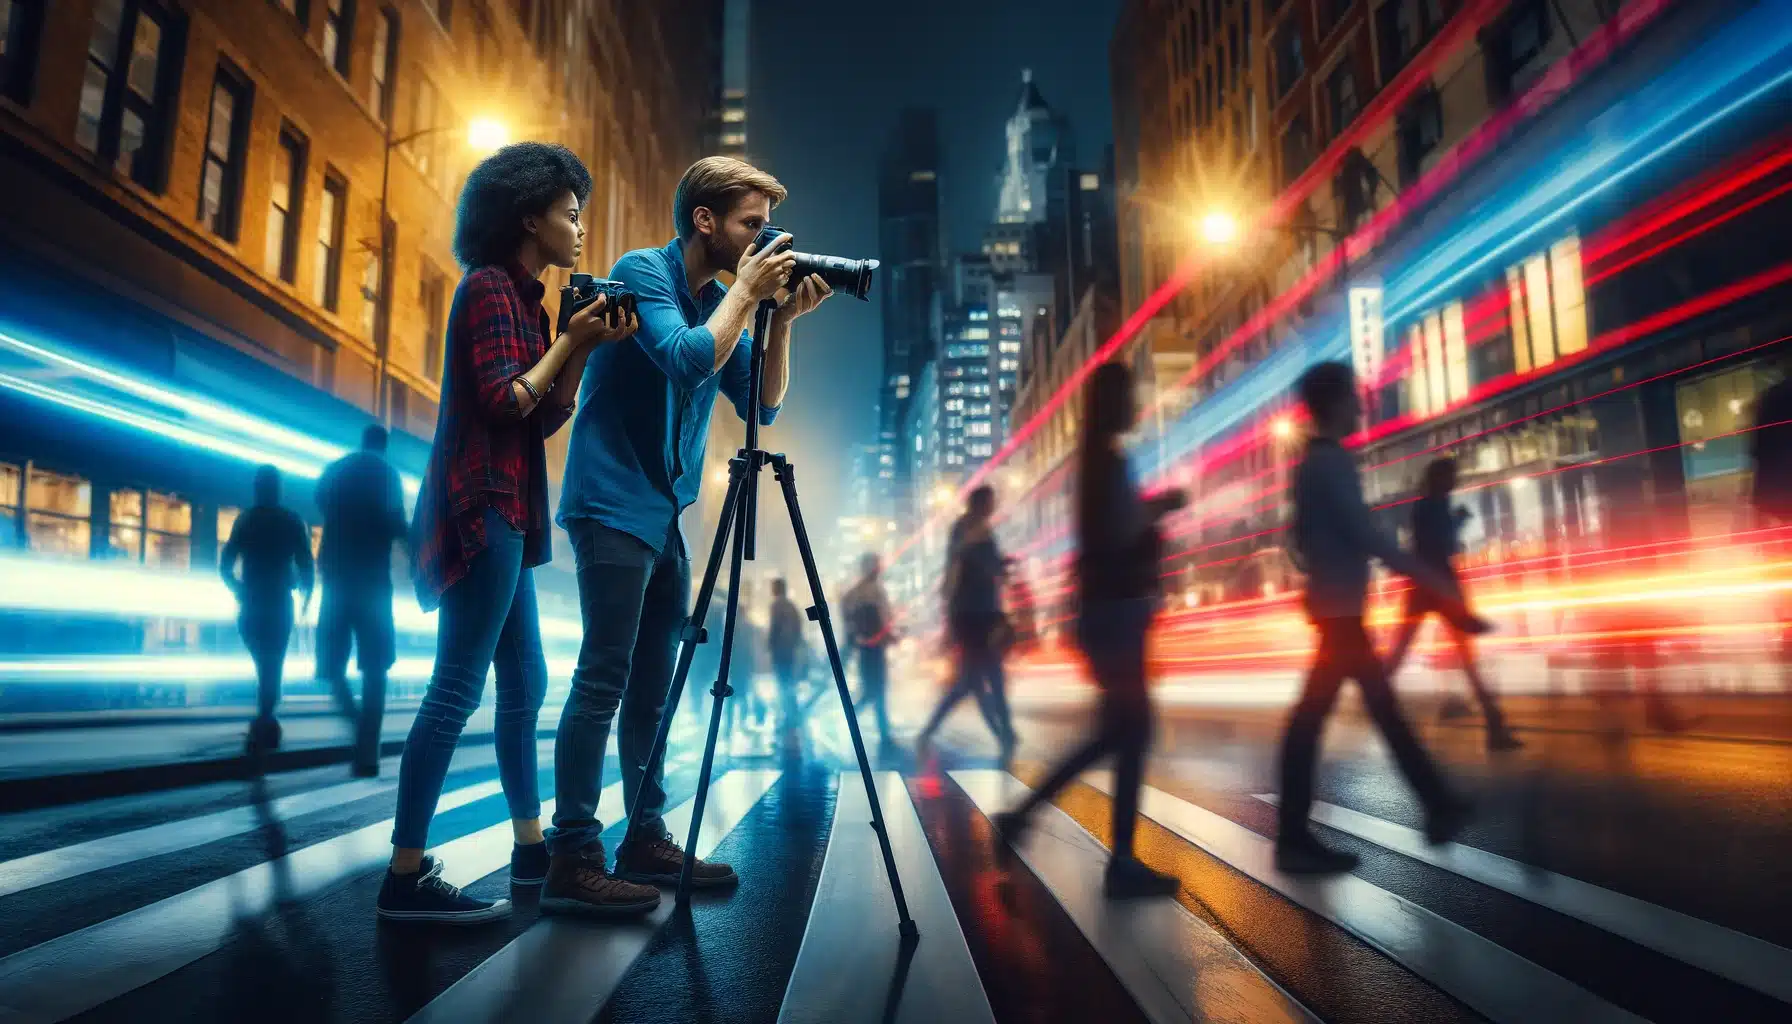 Two photographers using long exposure techniques to capture the dynamic movements of a busy city street at night, demonstrating the beauty of bulb mode photography.